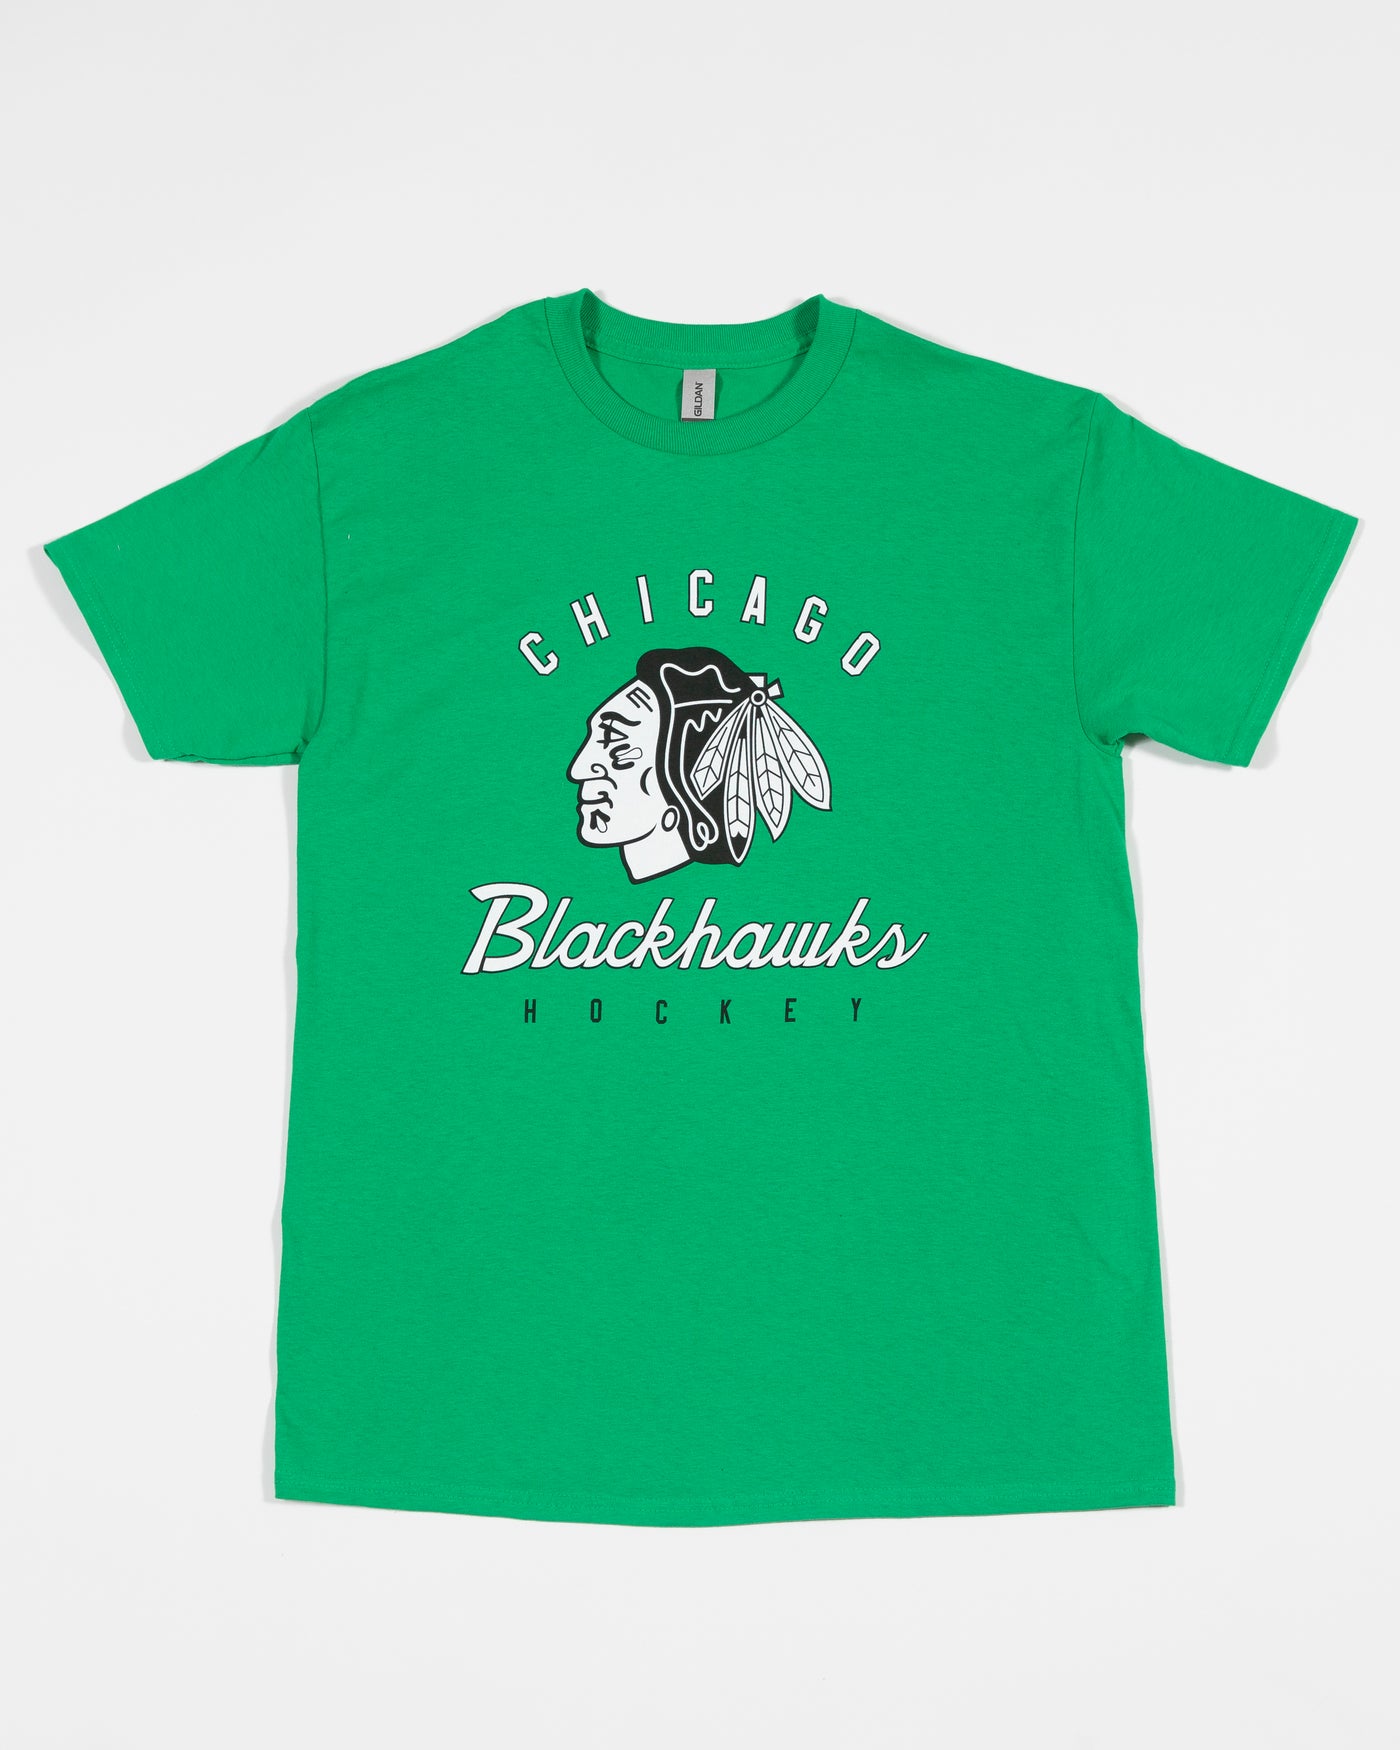 Green Chicago Blackhawks tee with black and white tonal primary logo and wordmark across chest - front lay flat